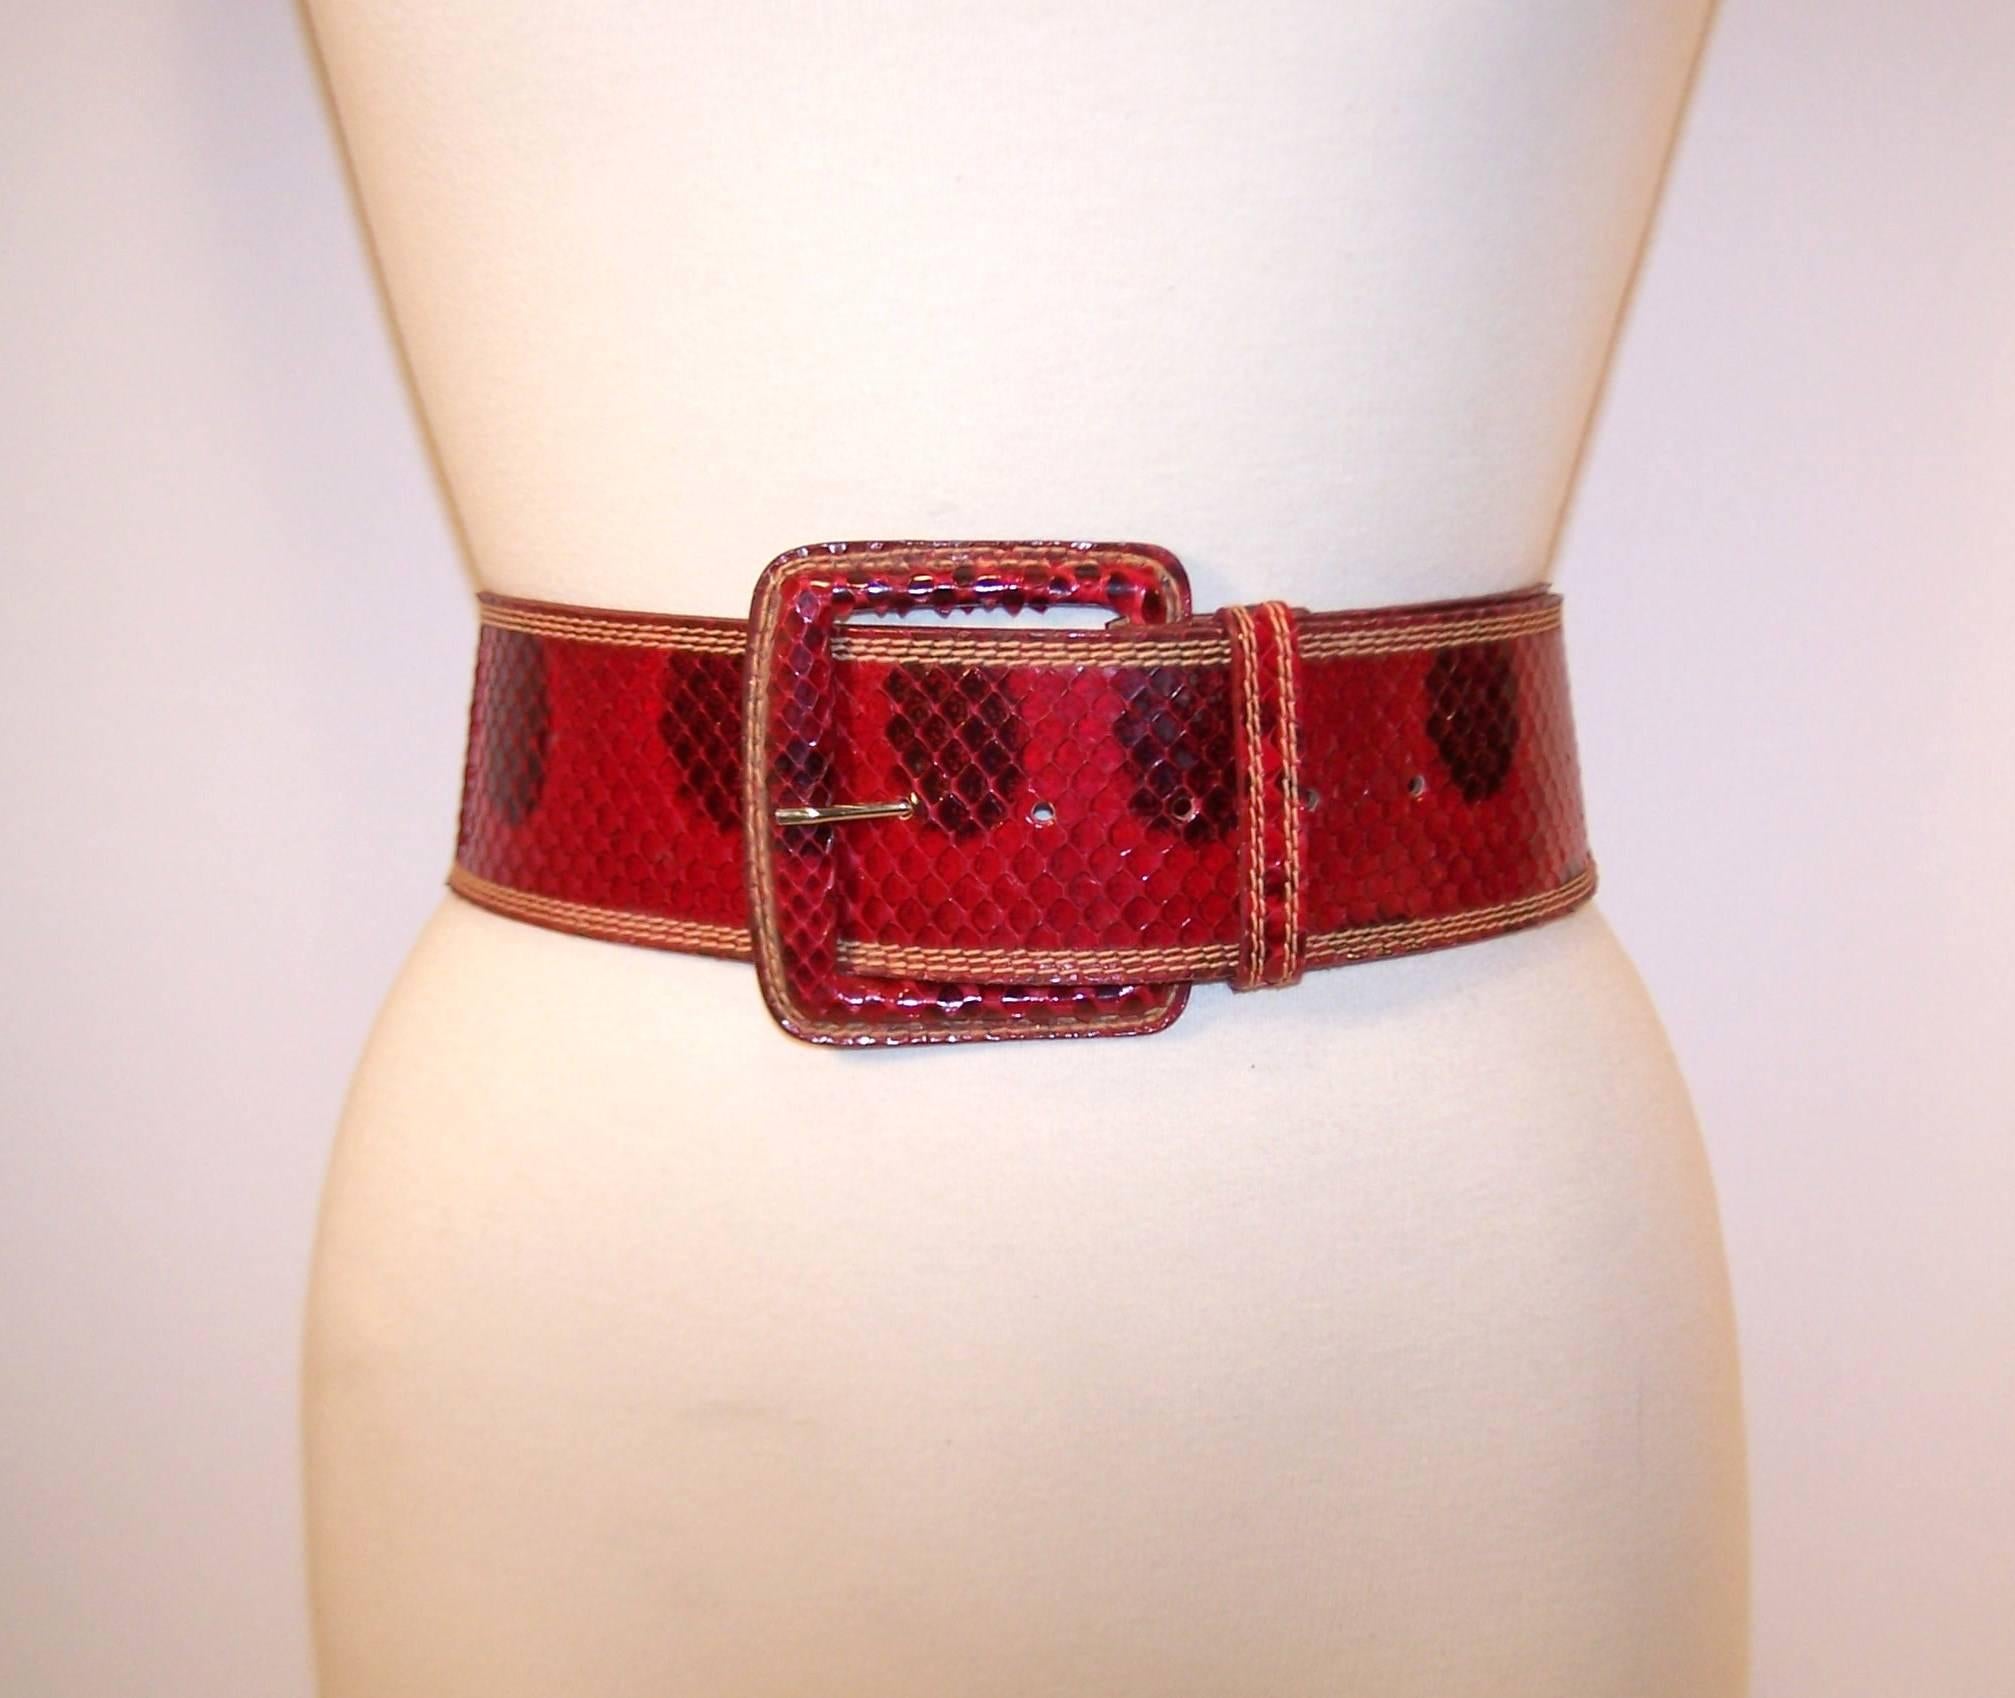 Cinch it in style with this Carlos Falchi red and black snakeskin belt.  The wide belt and squared buckle make for a perfect focal point to add structure and a finishing touch to your ensemble.  Measures 2.5